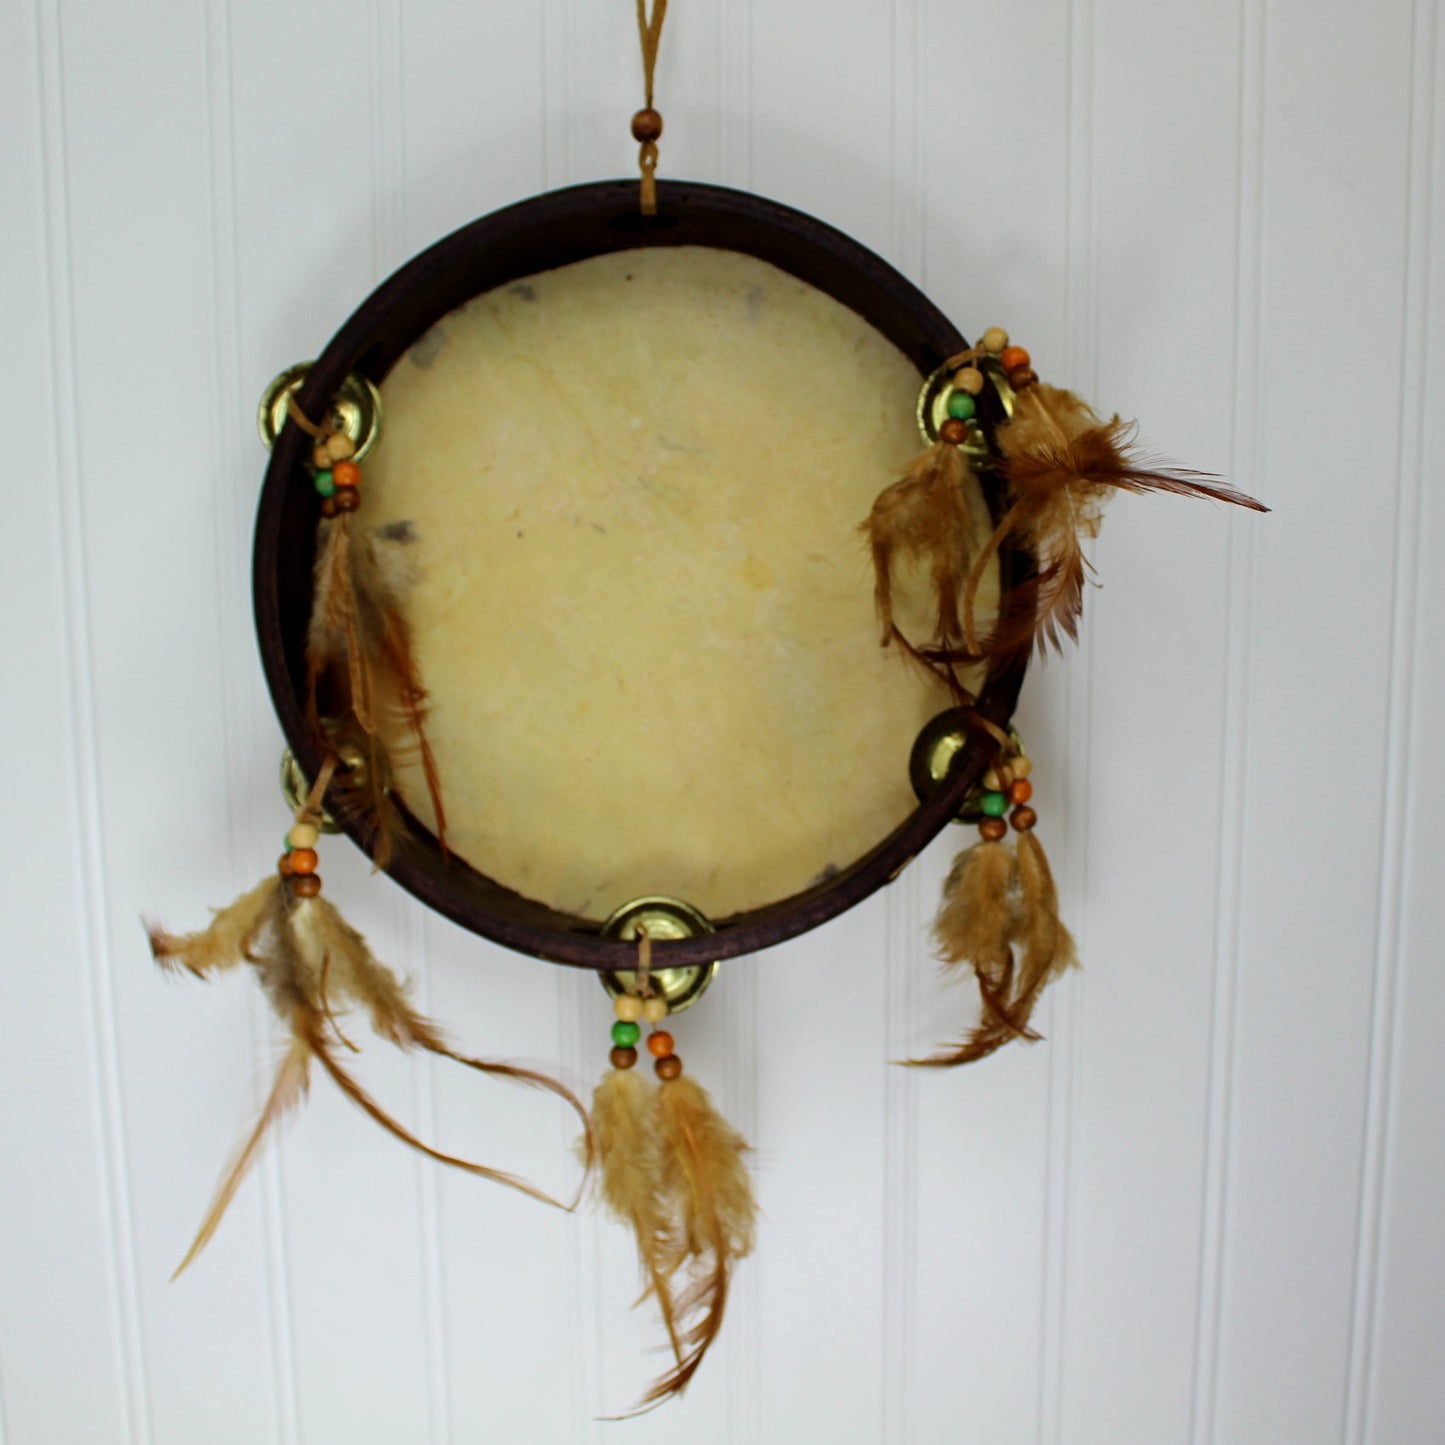 Tambourine Souvenir Native American Picture Feathers Beads Wall Decor back of tambourine